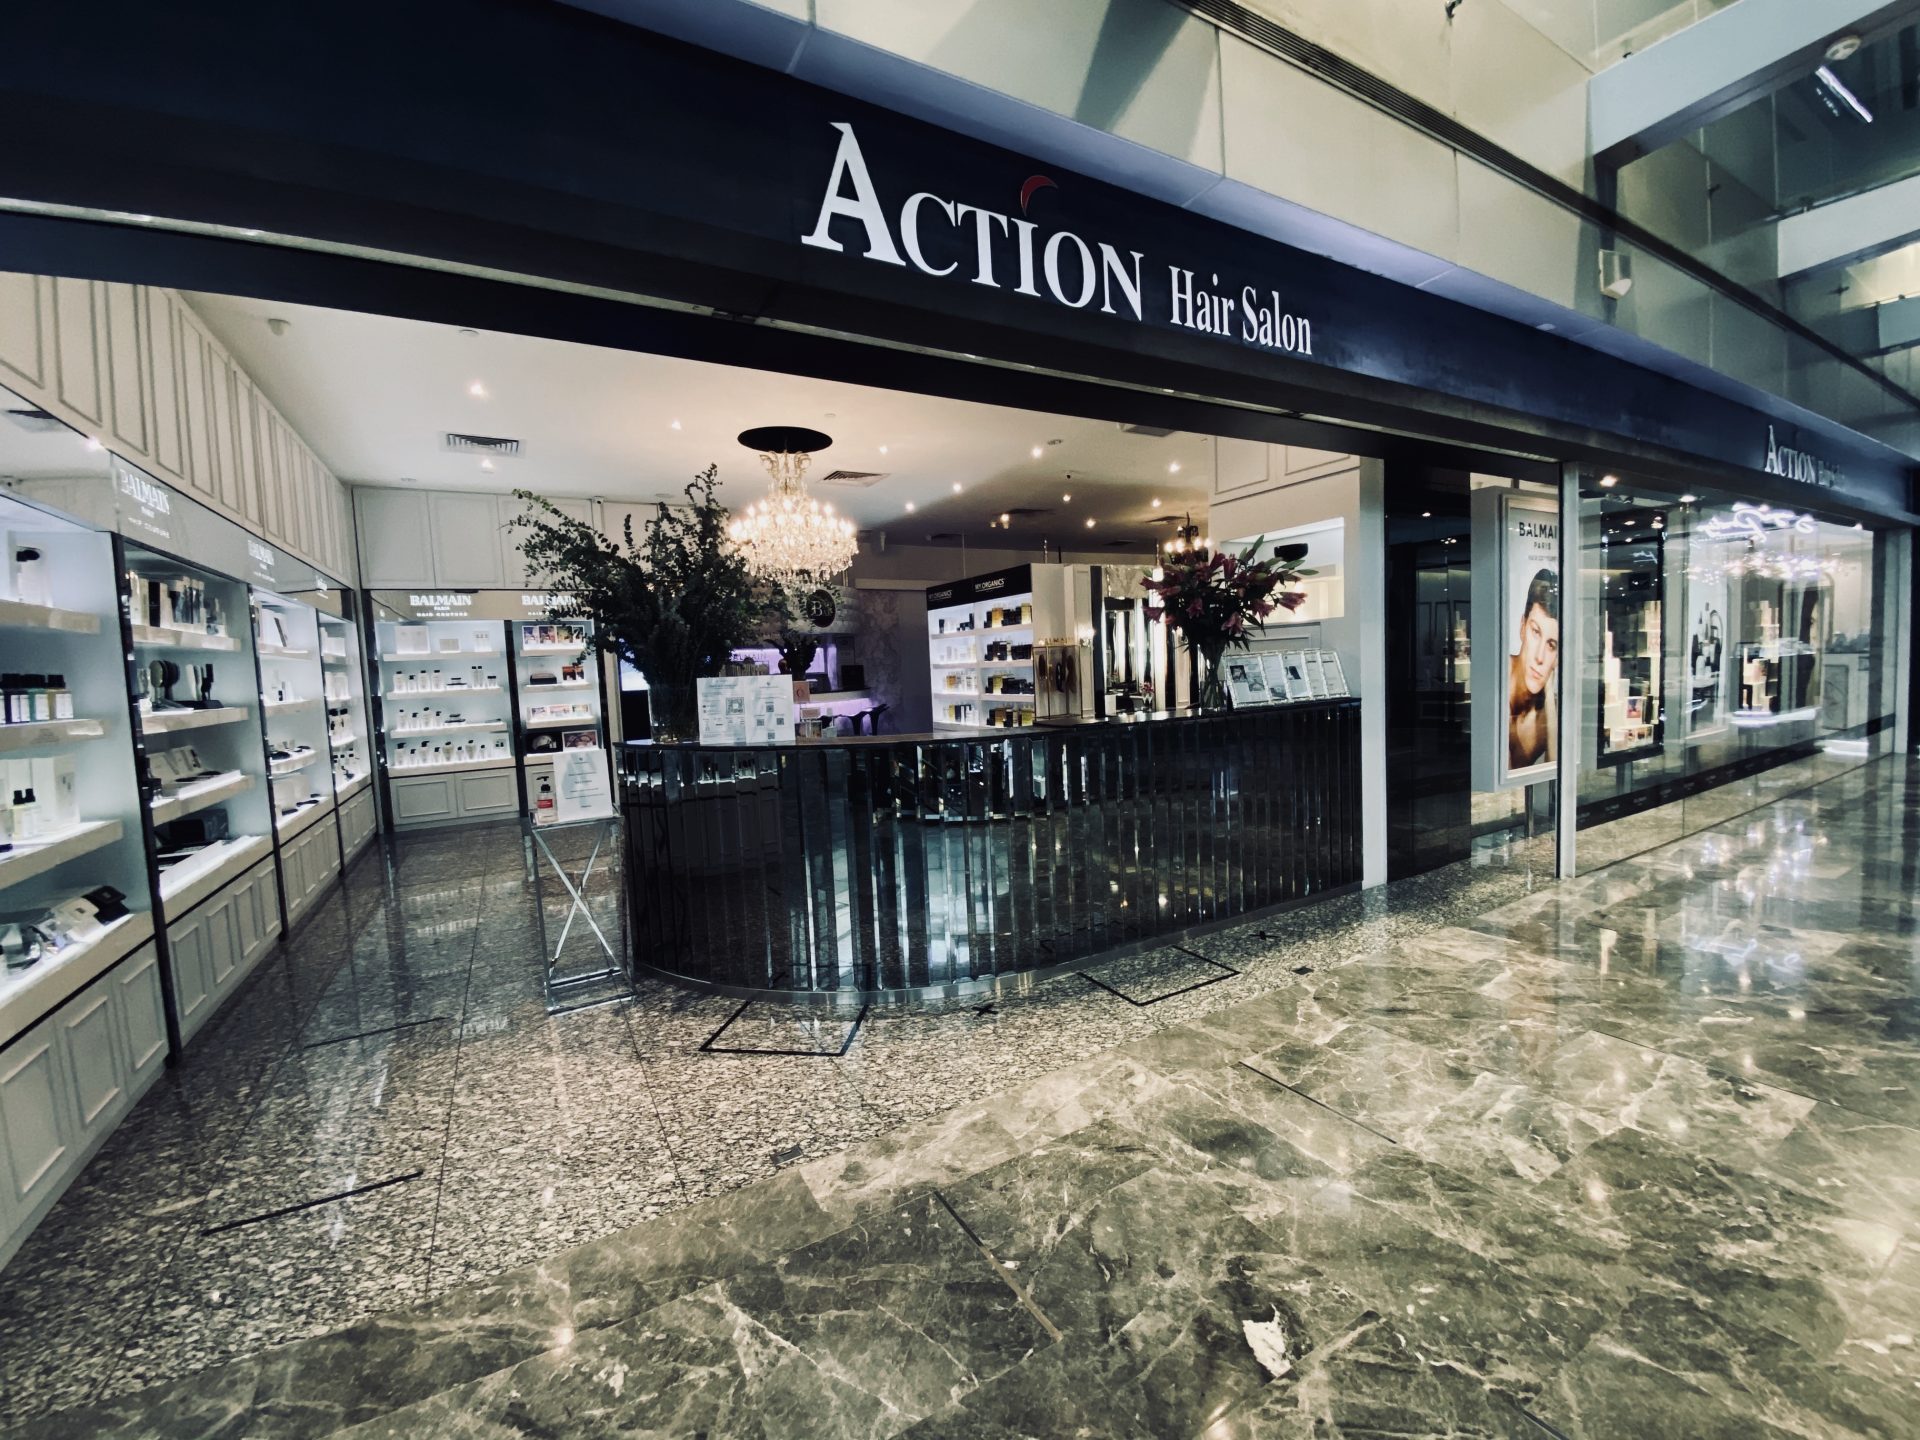 Action Hair Salon: Luxury Ambience and Top Quality Hairdressing Experiences  - Luxury Lifestyle Awards